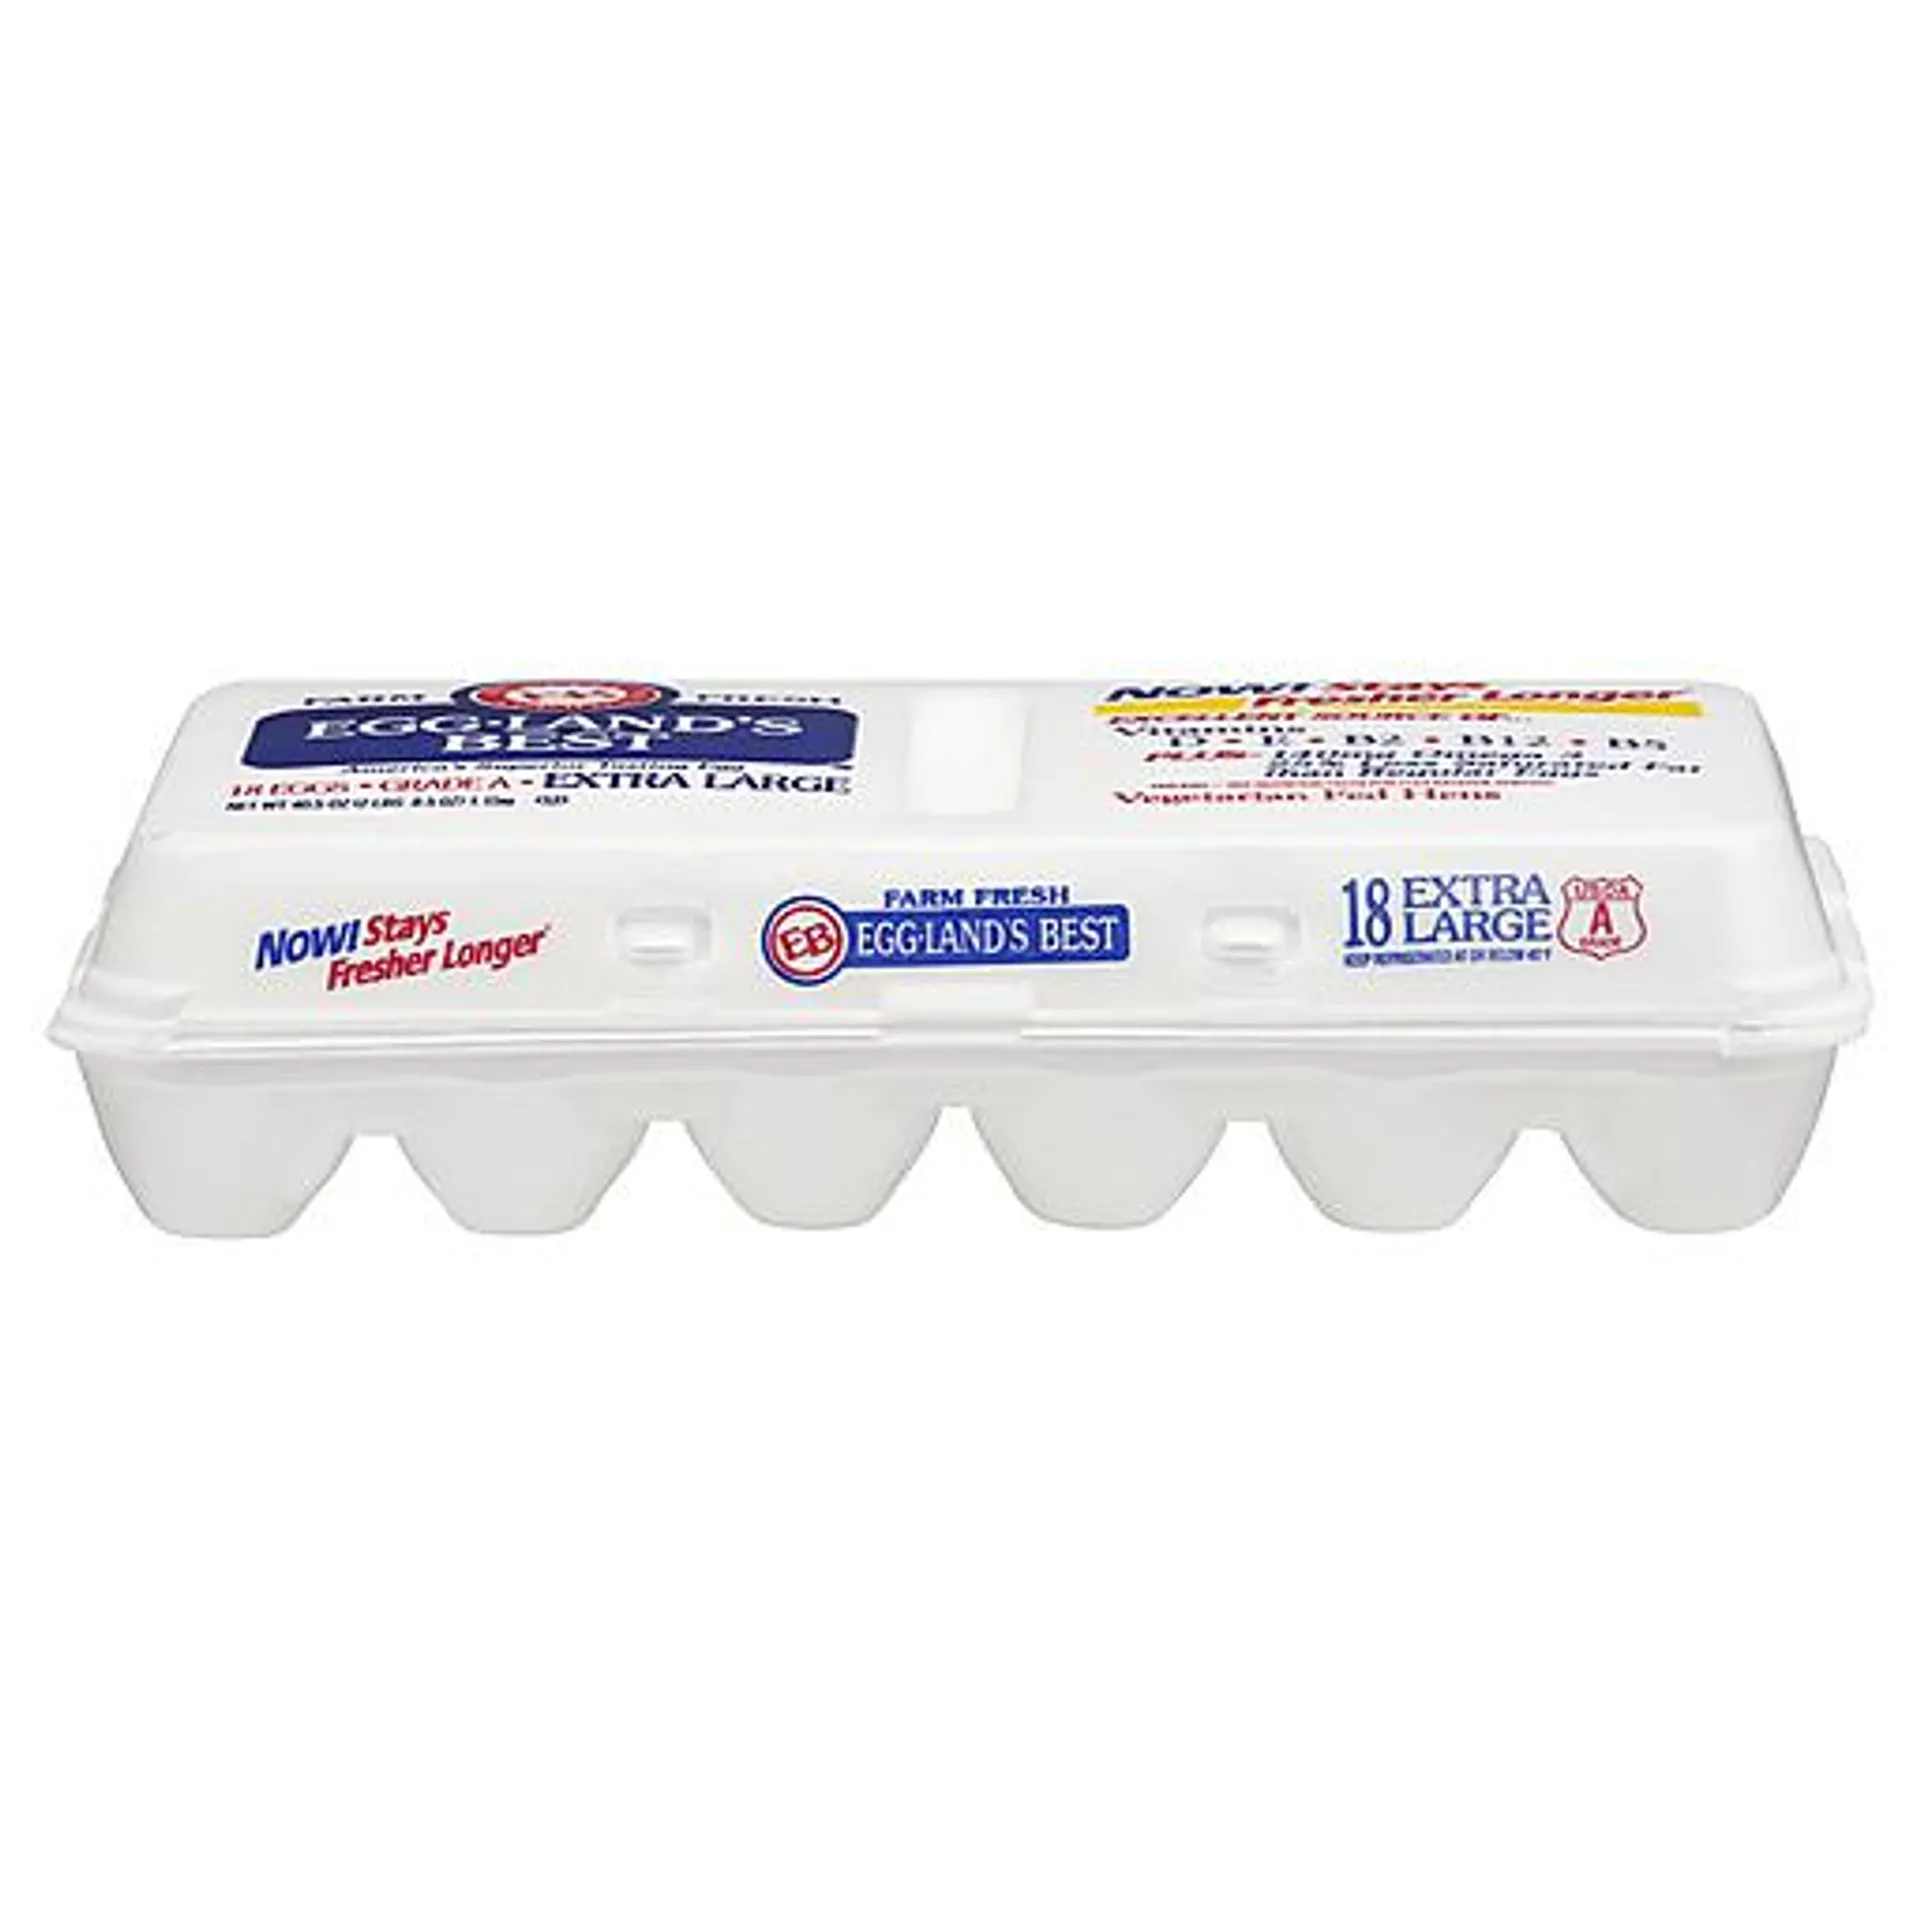 Egglands Best Extra Large Eggs 18 ct package